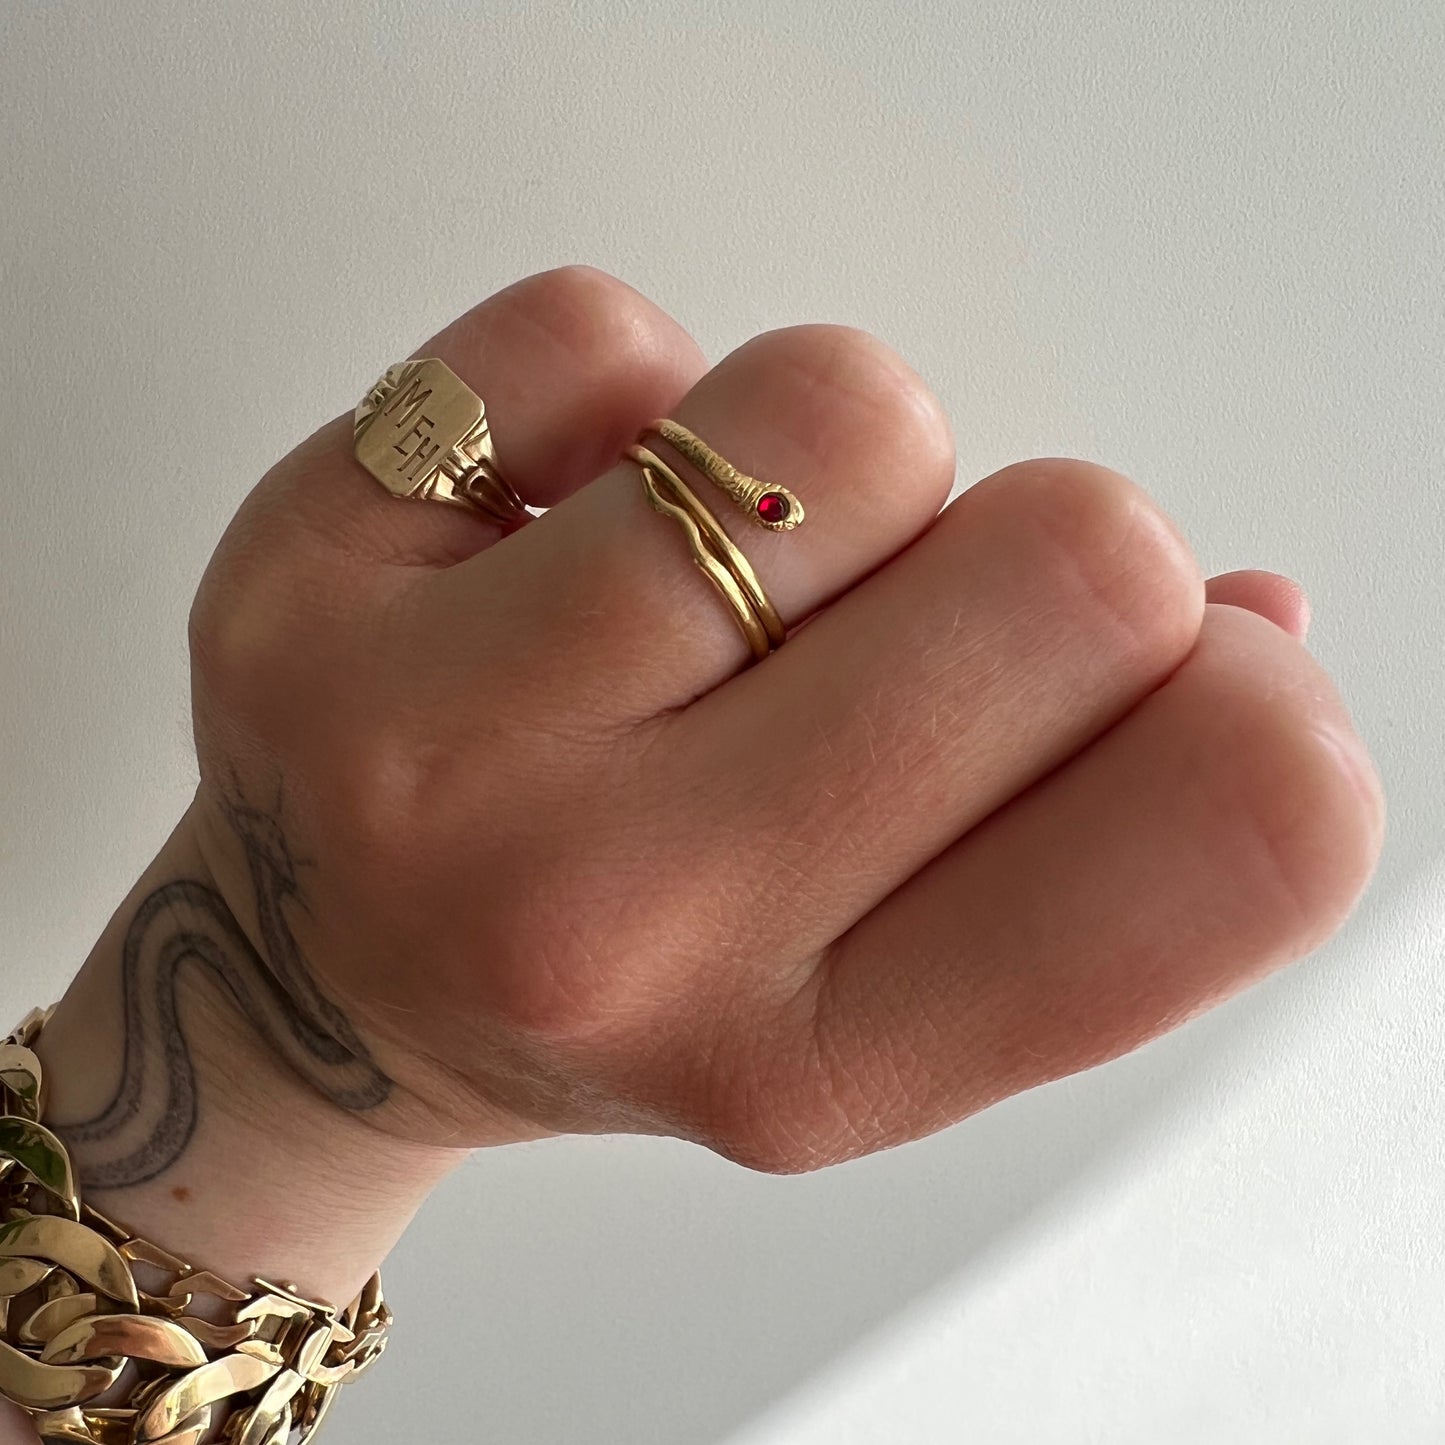 V I N T A G E // wrap around stacker / 18k yellow gold and red paste coiled snake ring / size 5.75-6